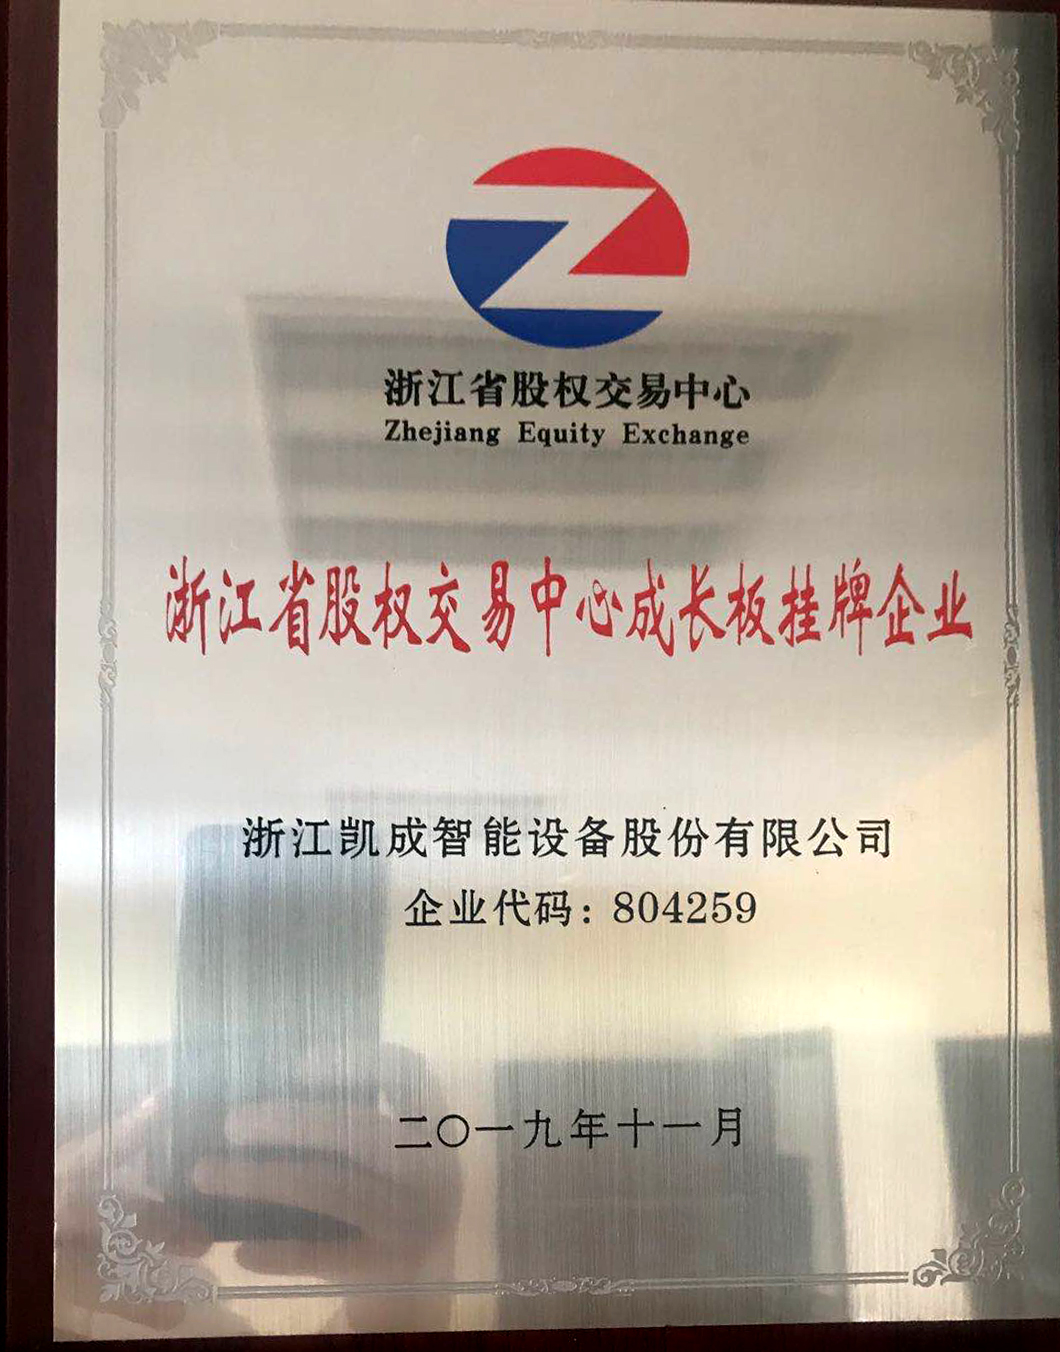 Listed enterprise on the Growth Board of Zhejiang Equity Exchange Center